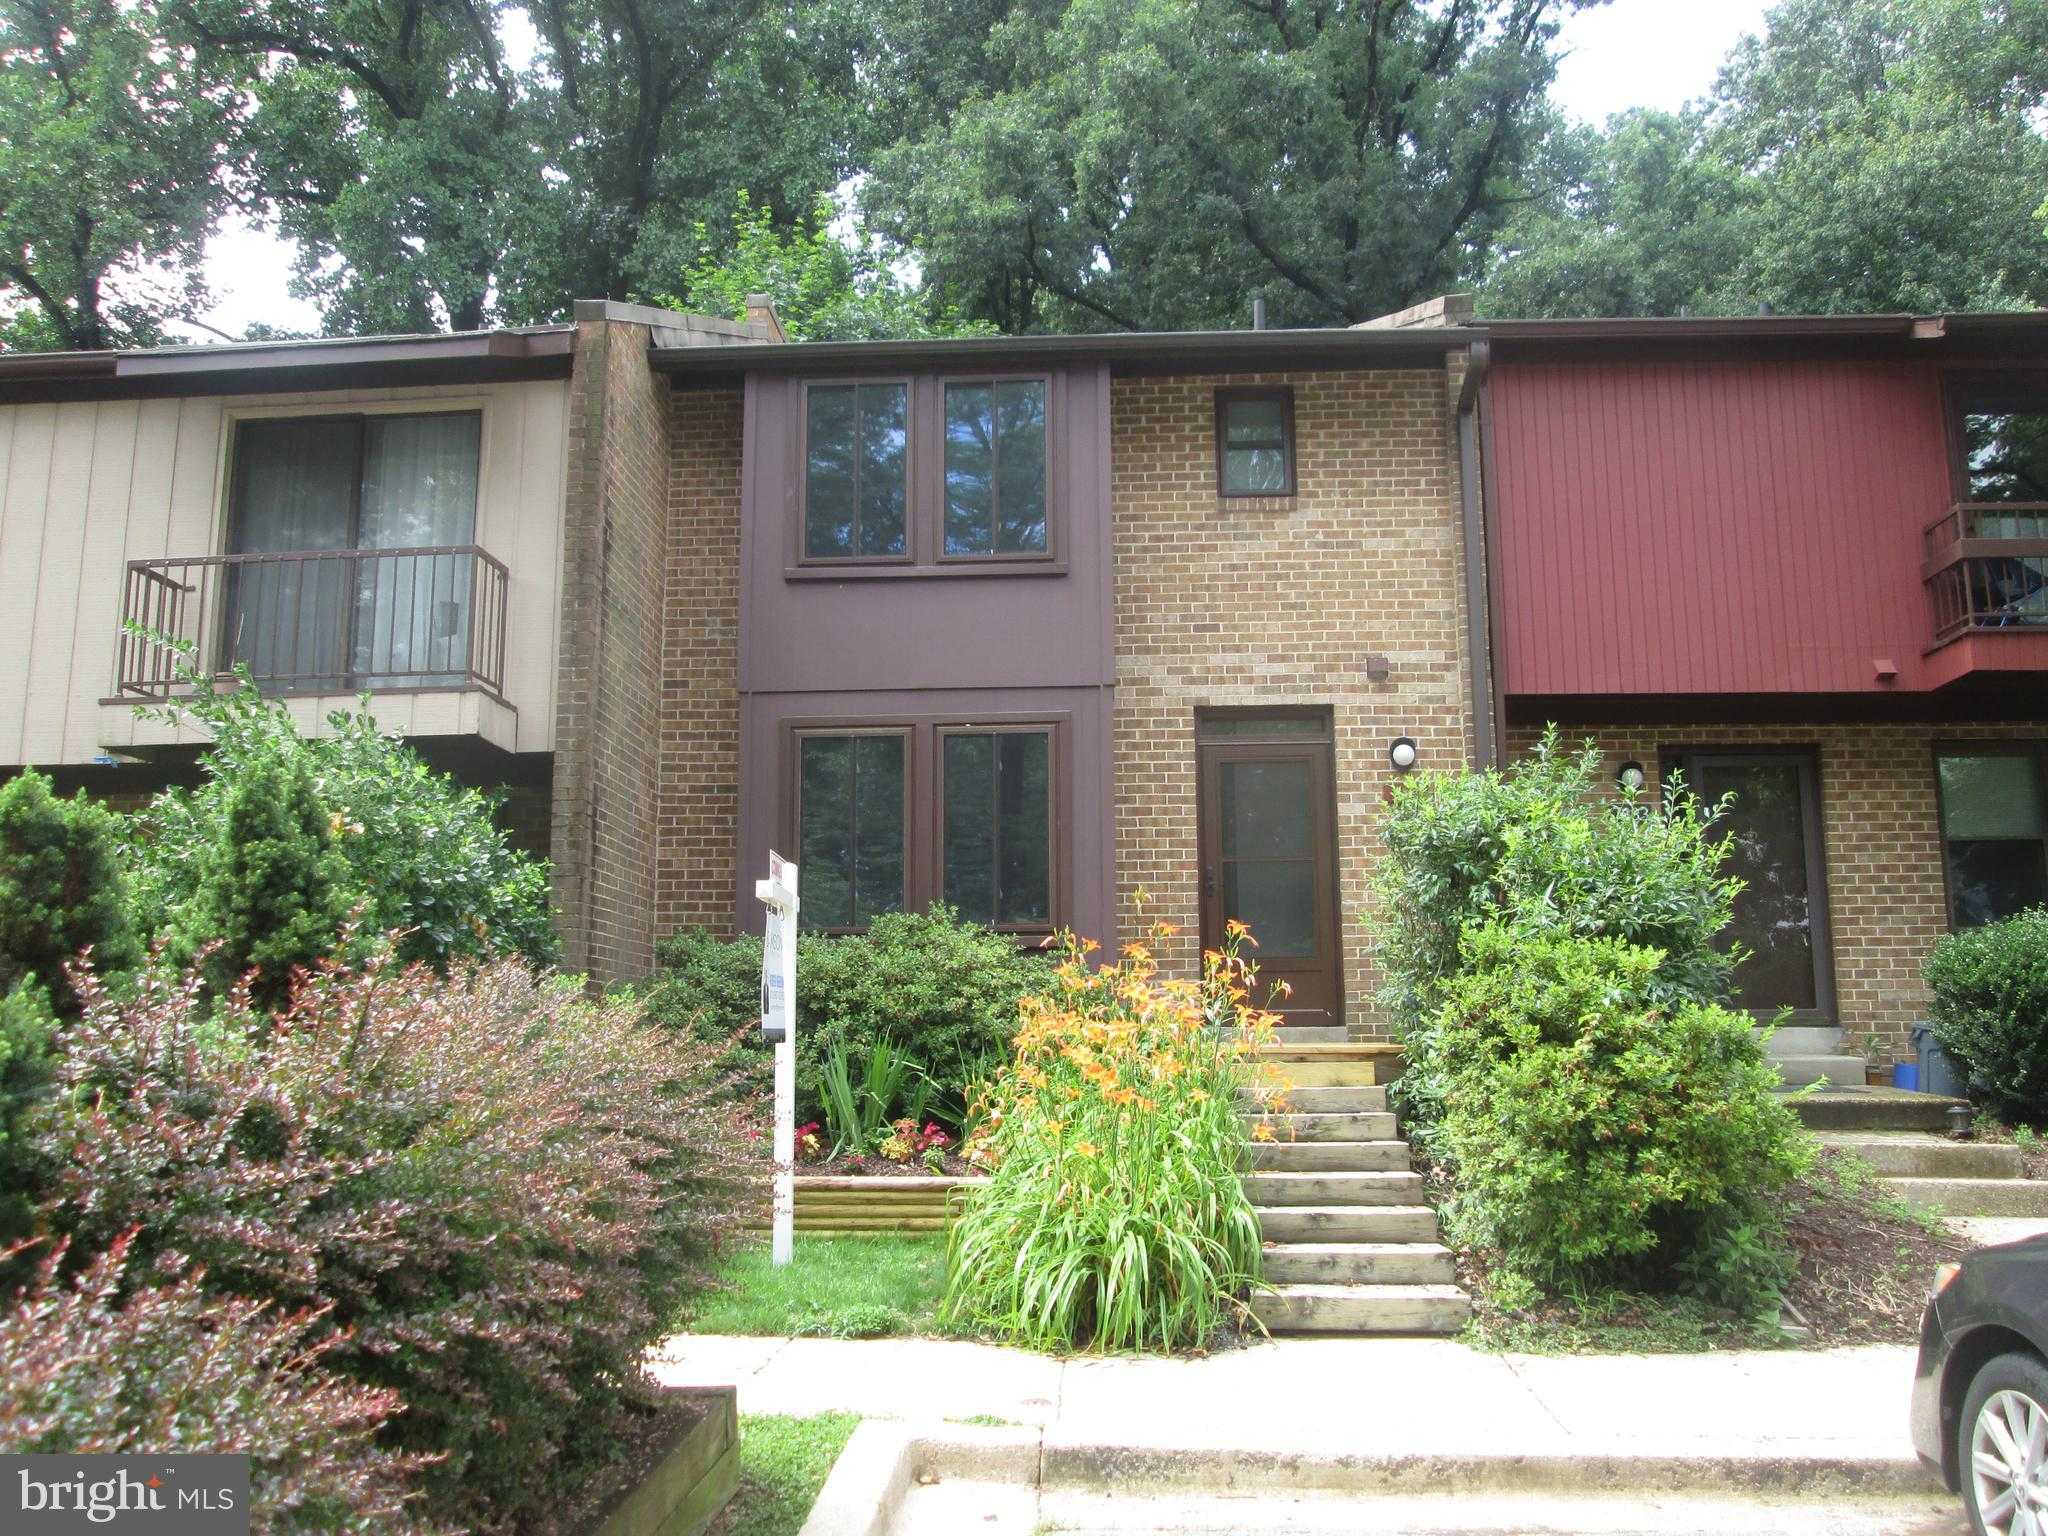 View ROCKVILLE, MD 20855 townhome